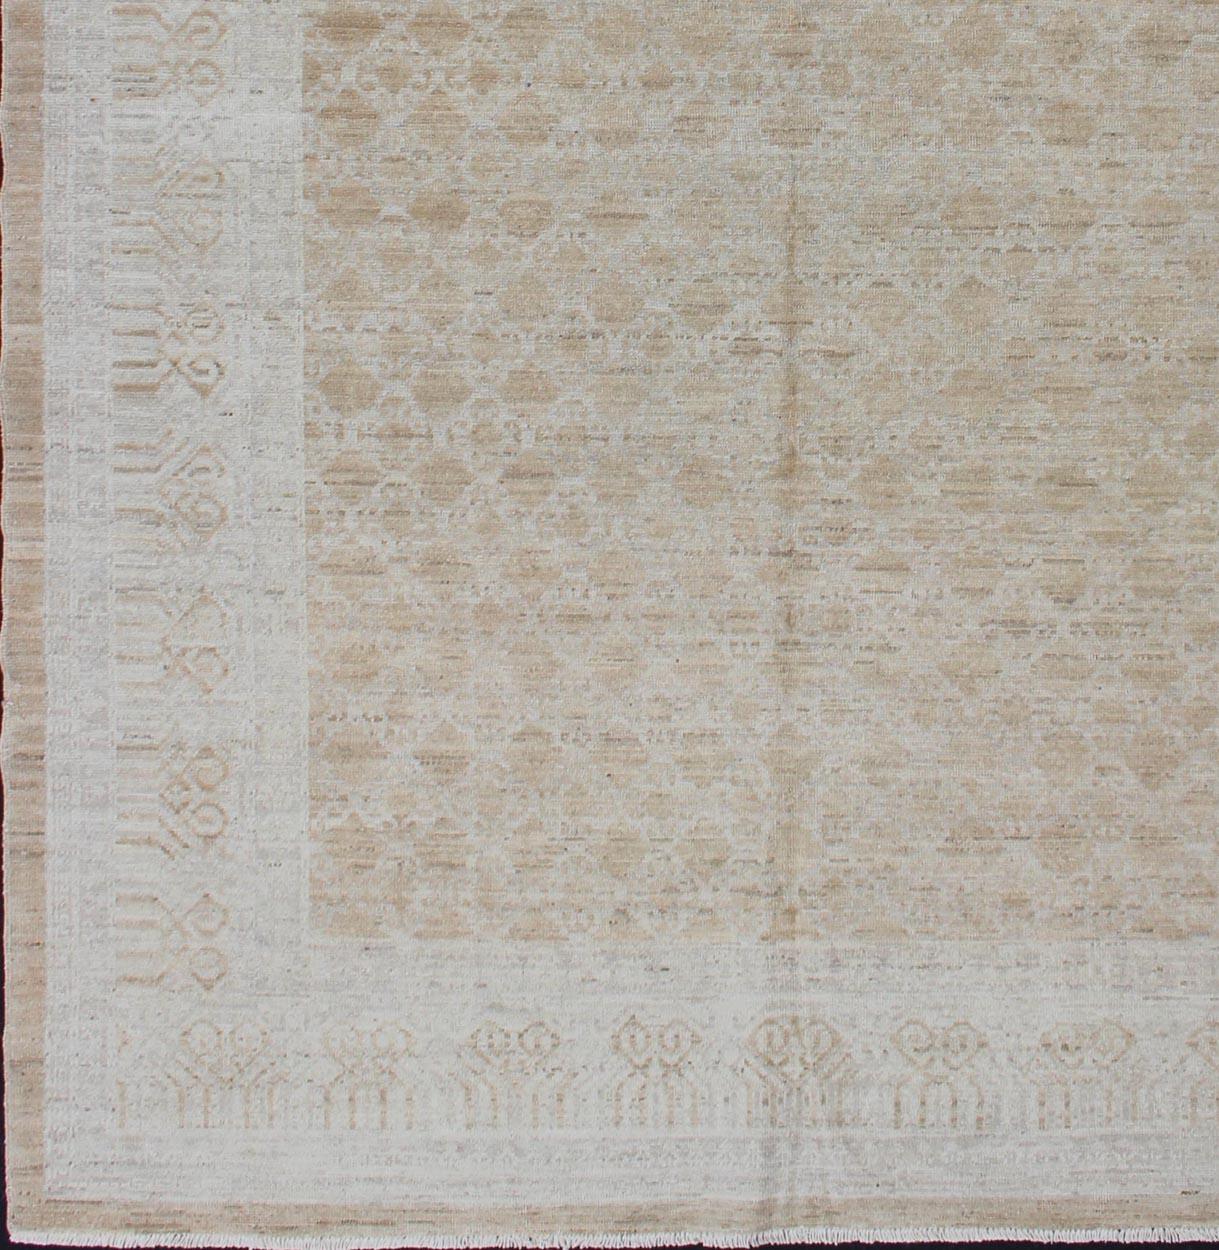 Khotan rug with geometric Medallions, rug 1912-269, country of origin / type: Afghanistan / Khotan

This Khotan features a geometric all-over design flanked by a repeating pattern in the border. The entirety of the piece is rendered in light tones,